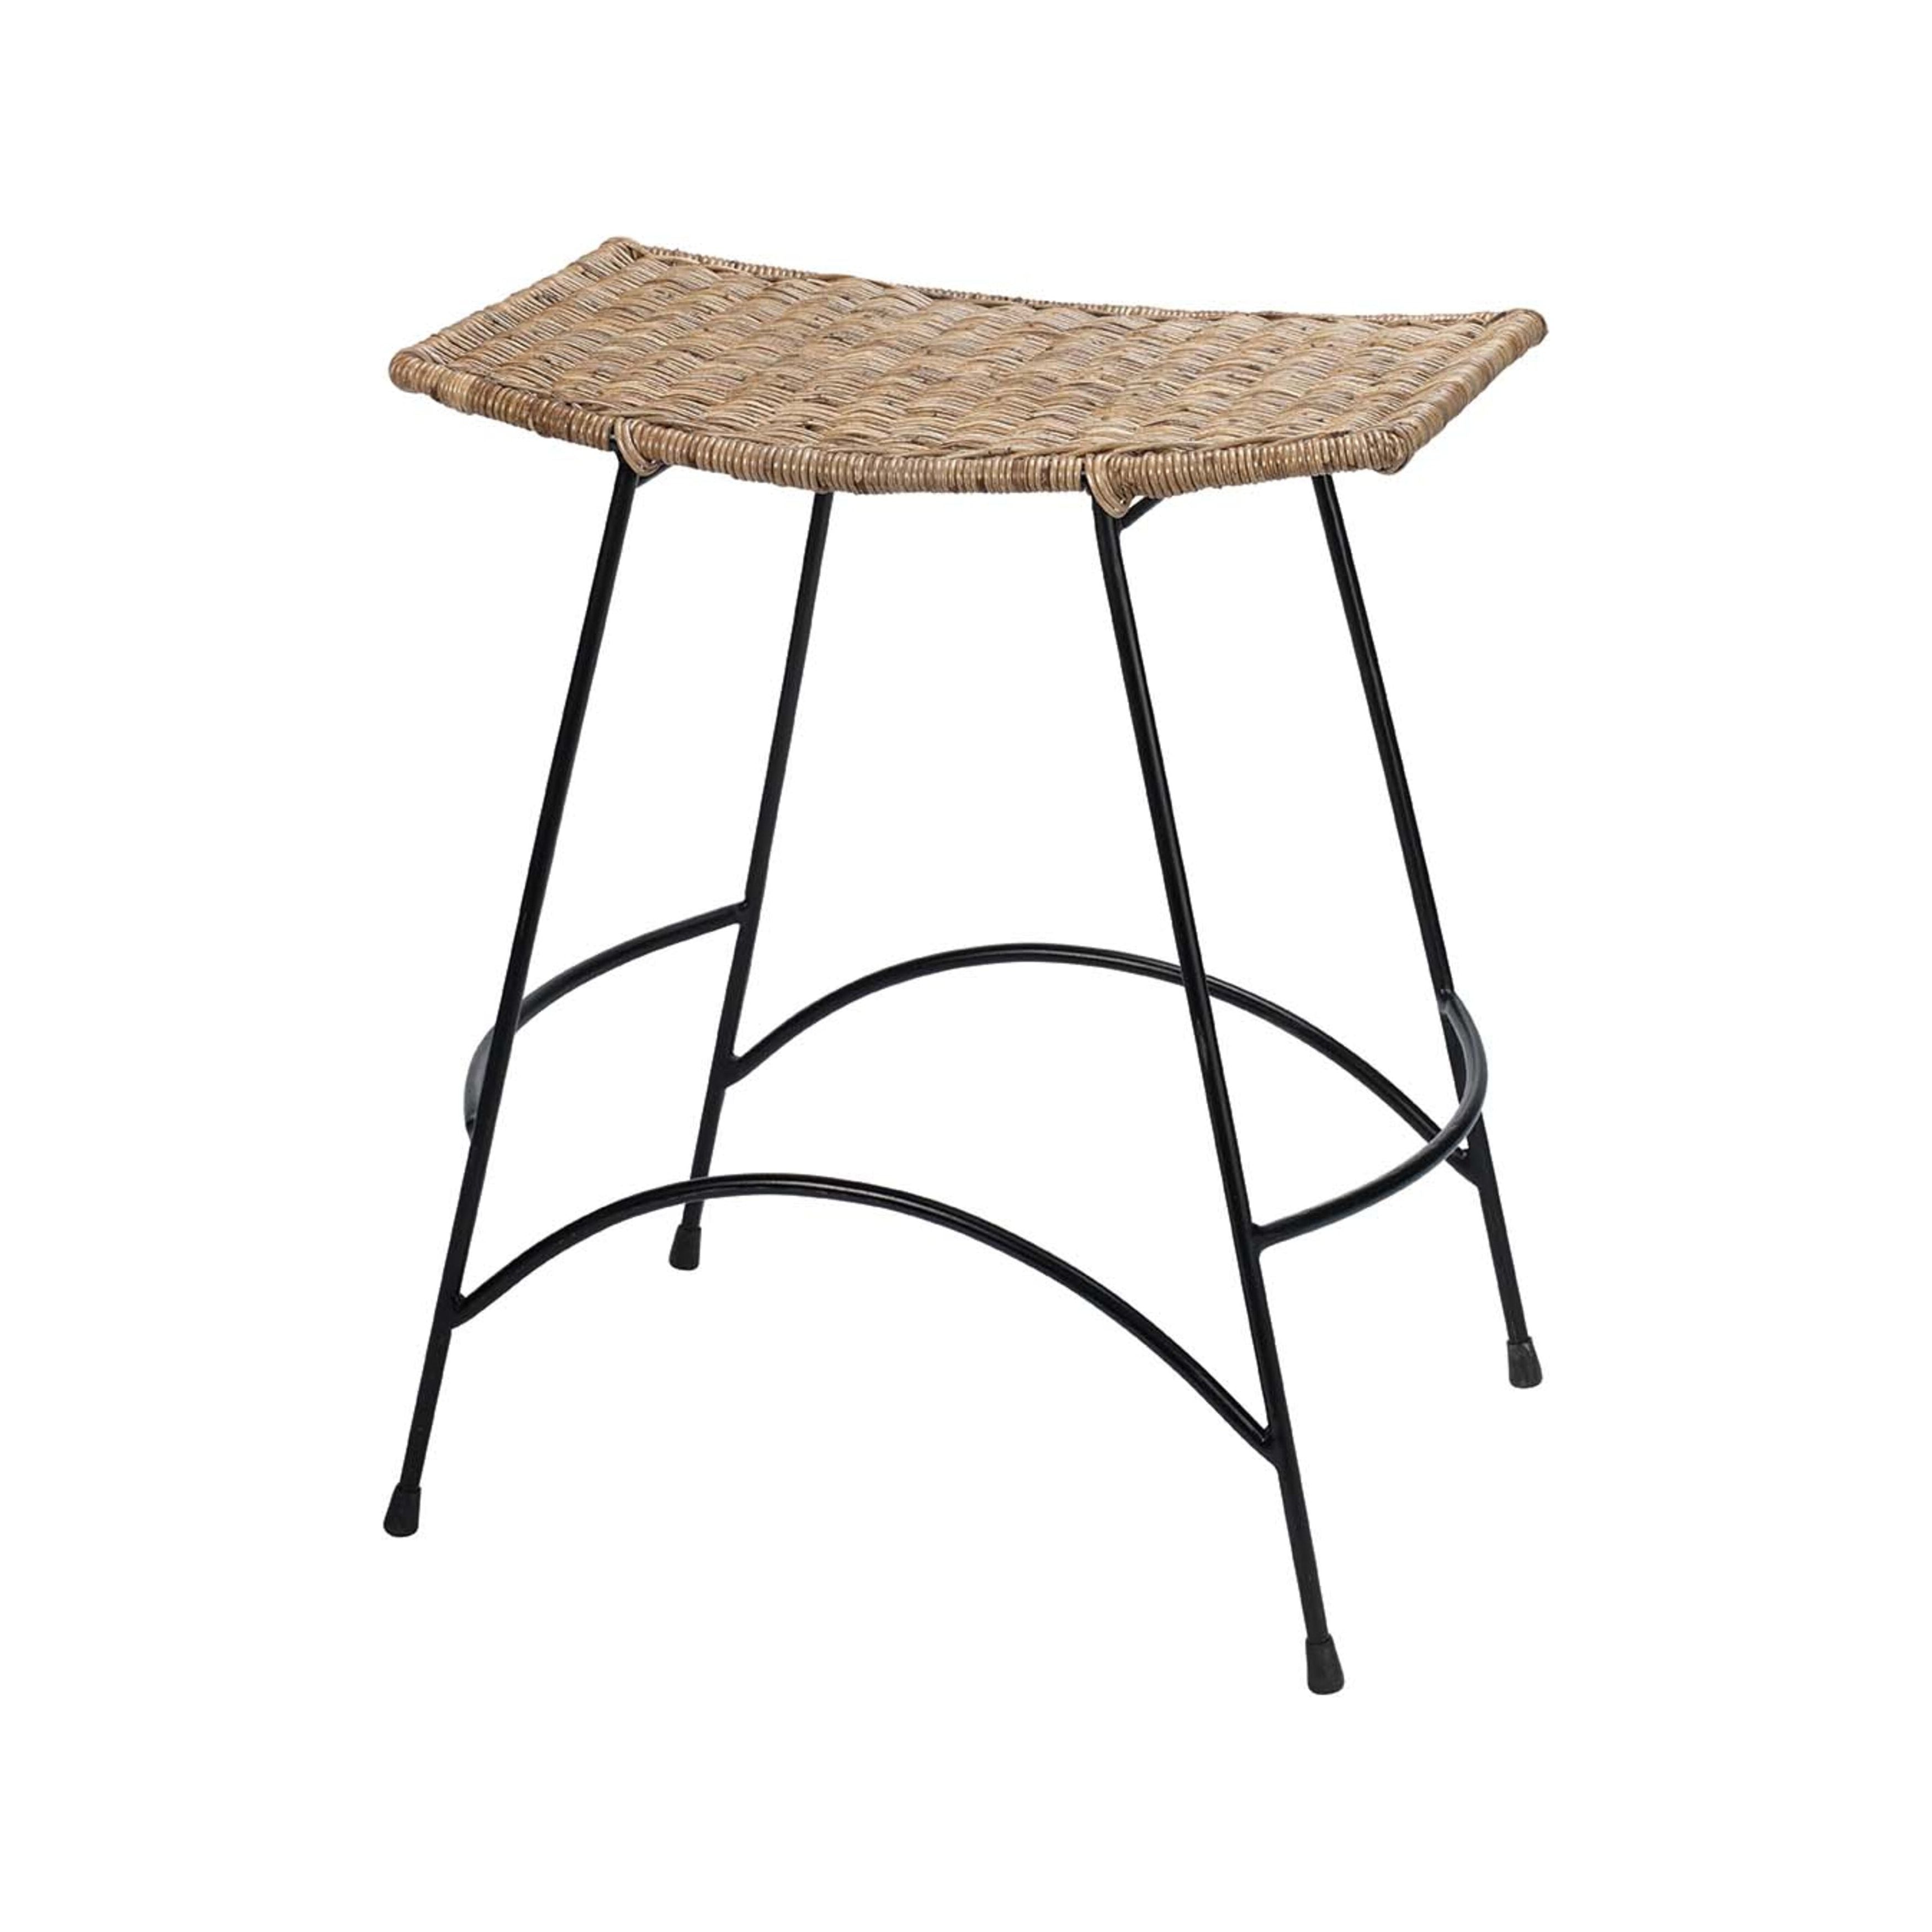 Jamie Young Company - 20WING-CSNA - Wing Counter Stool - Wing - Brown